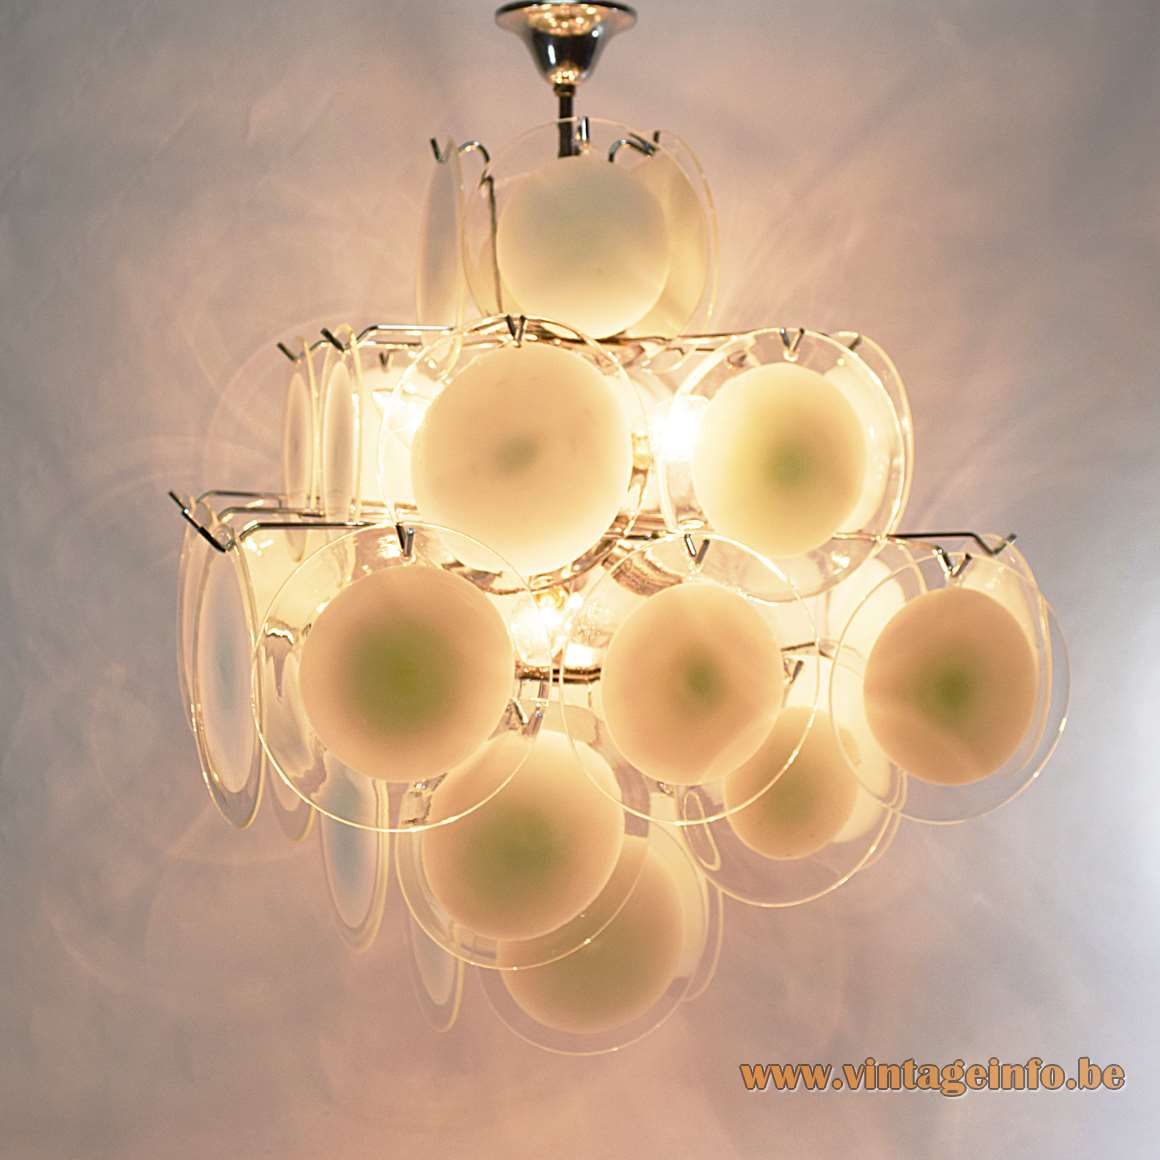 Gino Vistosi Multicoloured Discs Chandelier - Version with only white discs